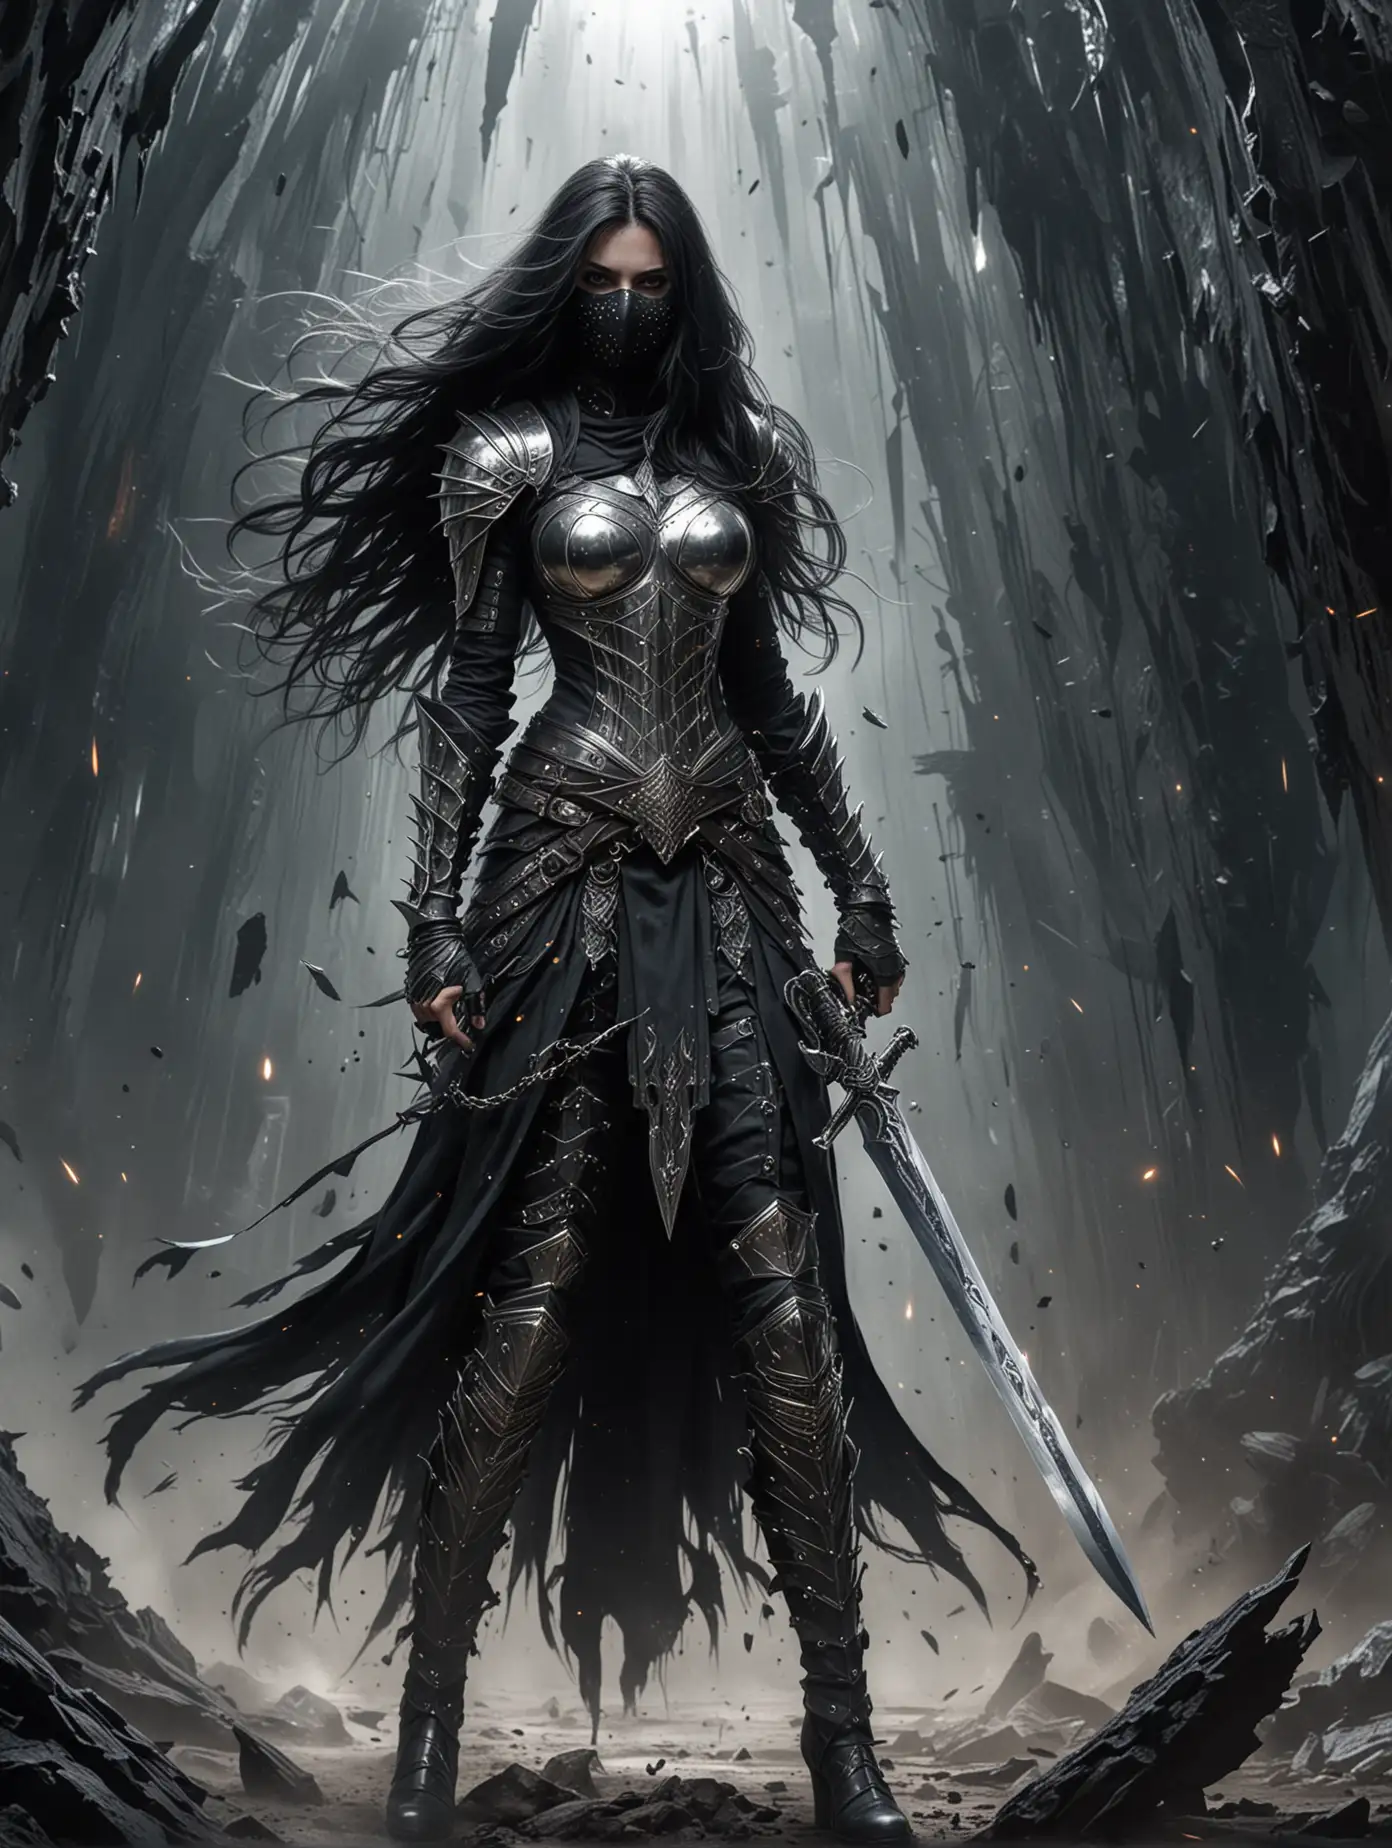 Powerful-Woman-Warrior-in-Voluminous-Silver-Armor-Confronts-a-Black-Hole